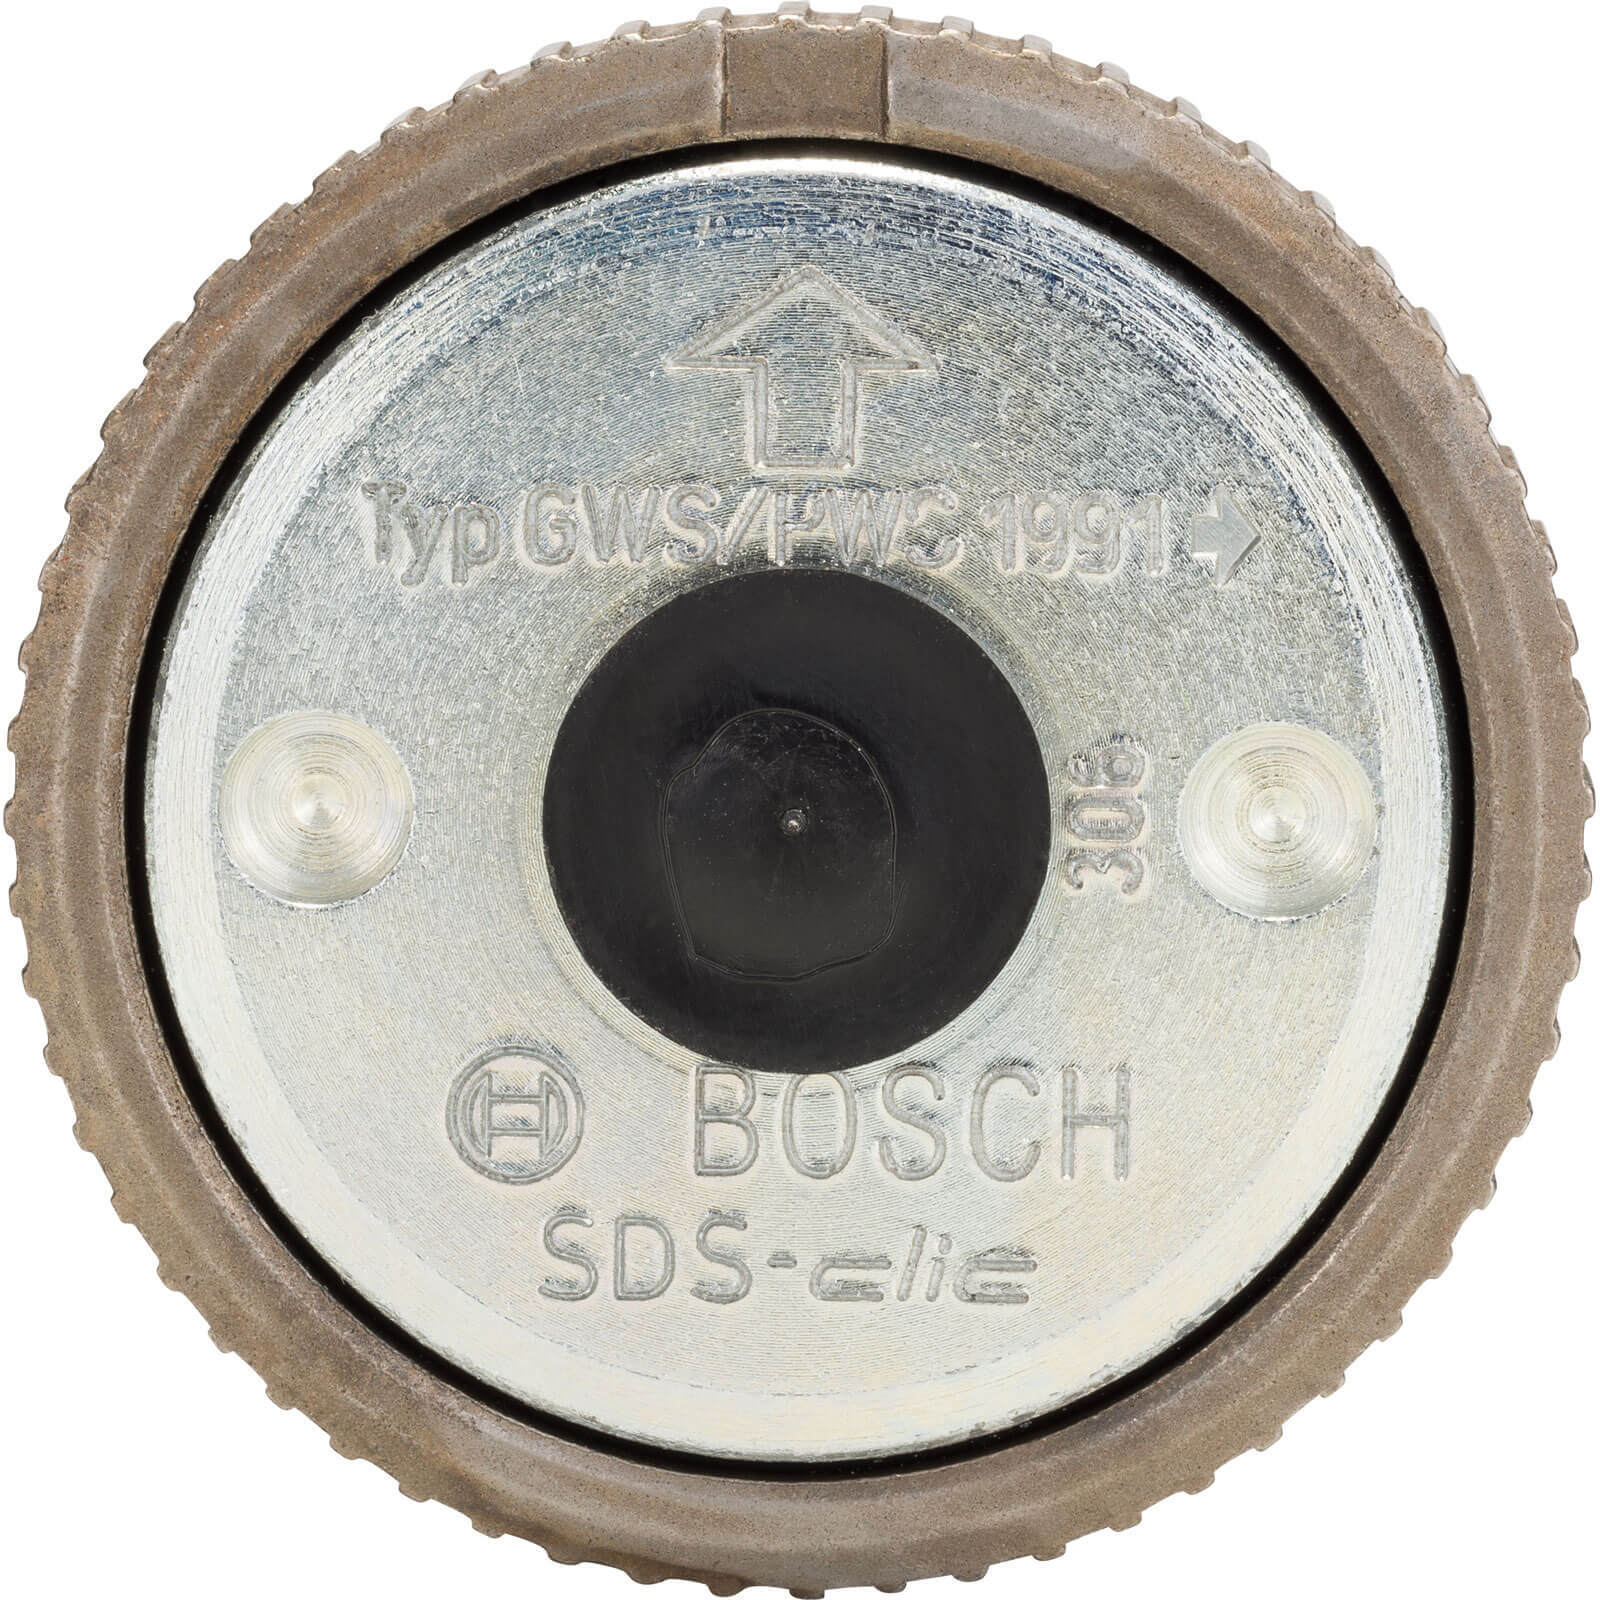 Photo of Bosch Sds Clic Quick Change Flange Locking Nut For Angle Grinders